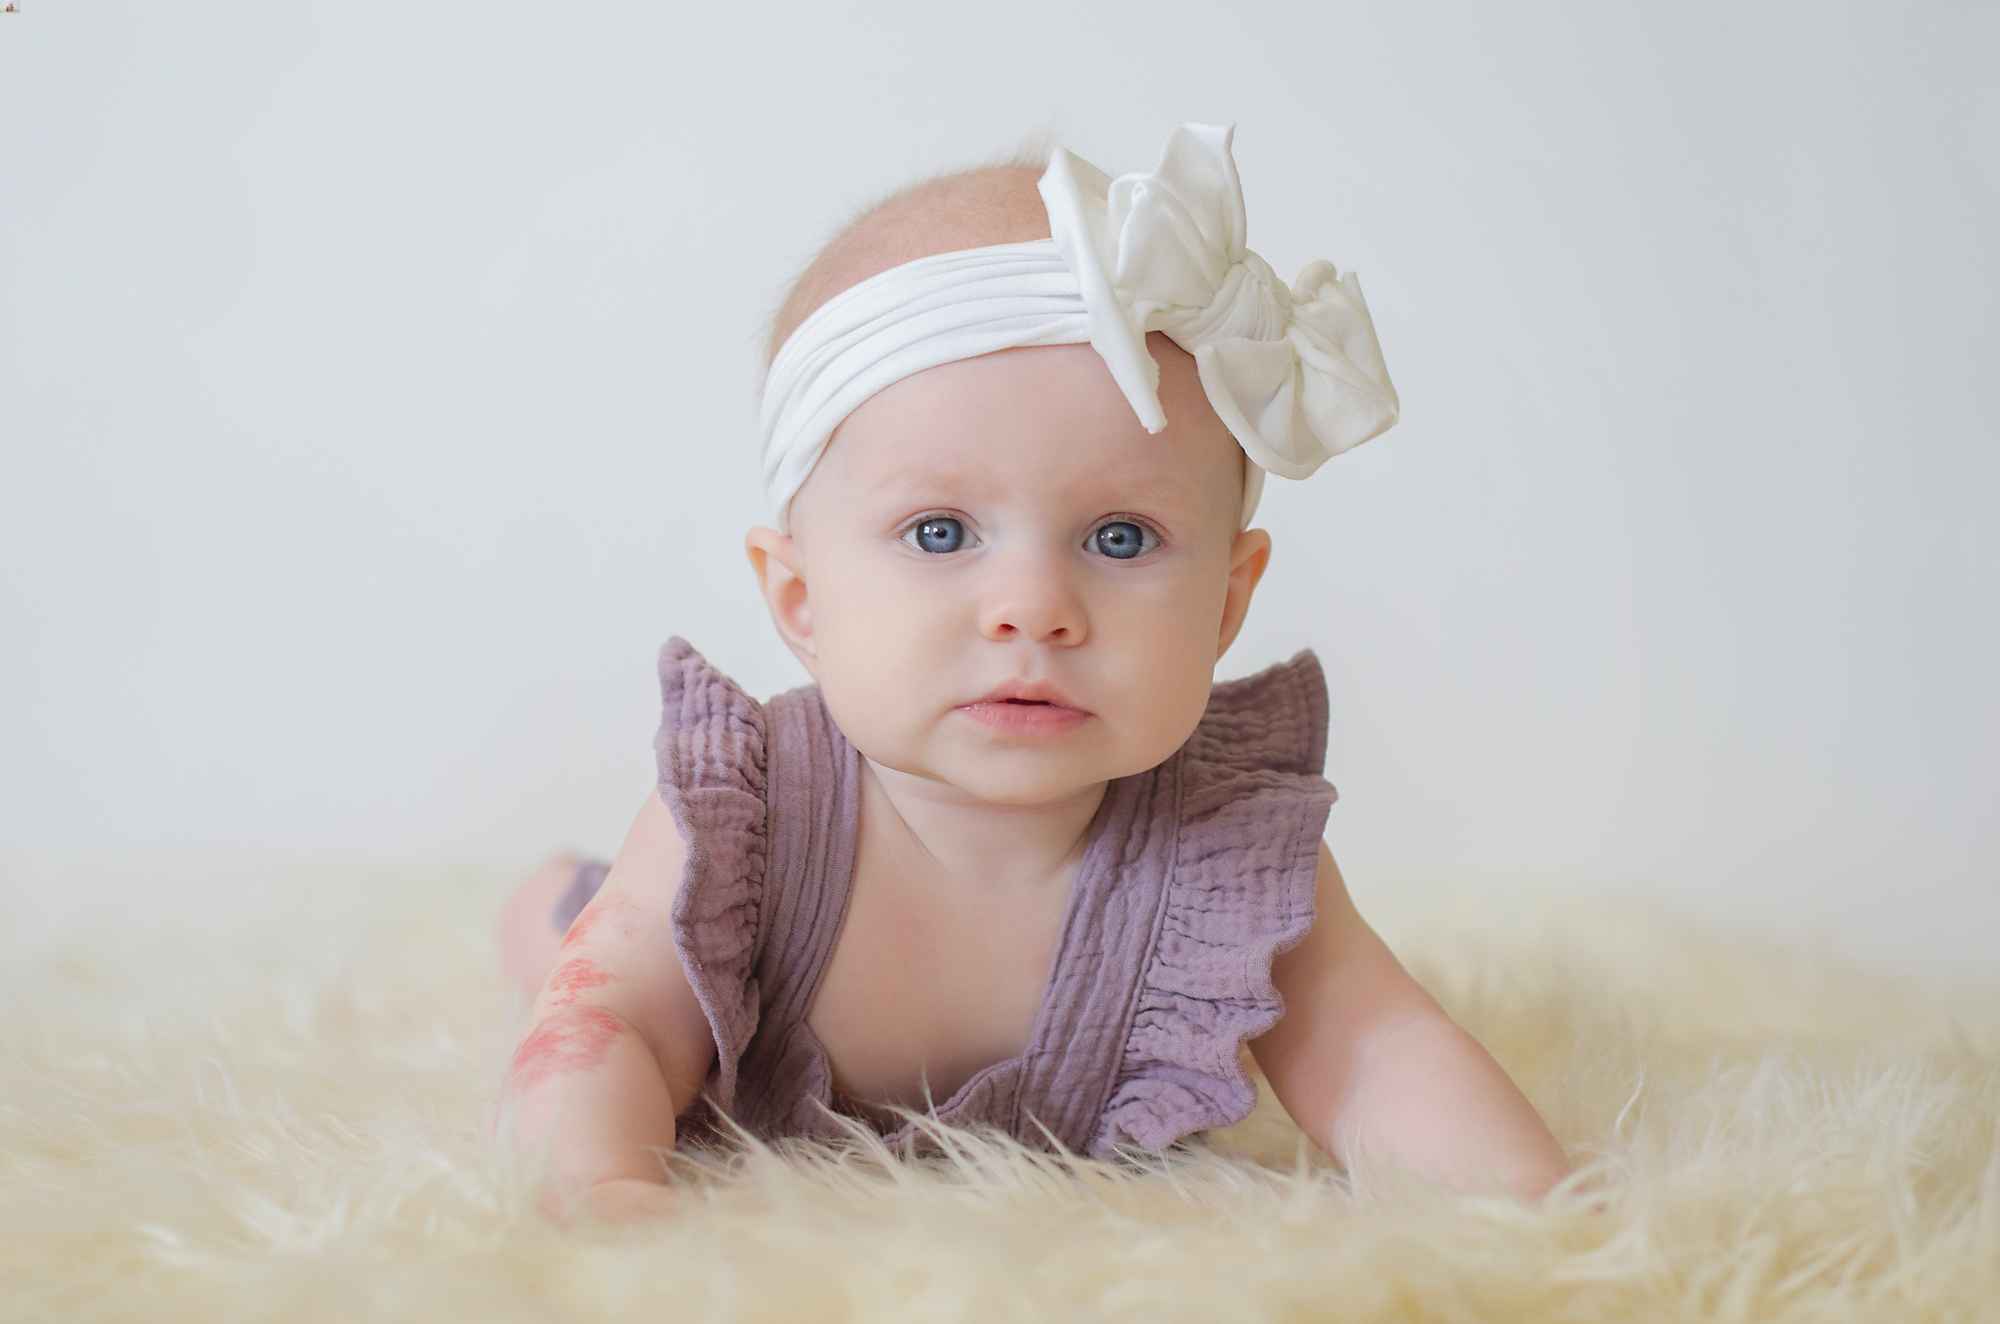 How to Make Headbands for Babies